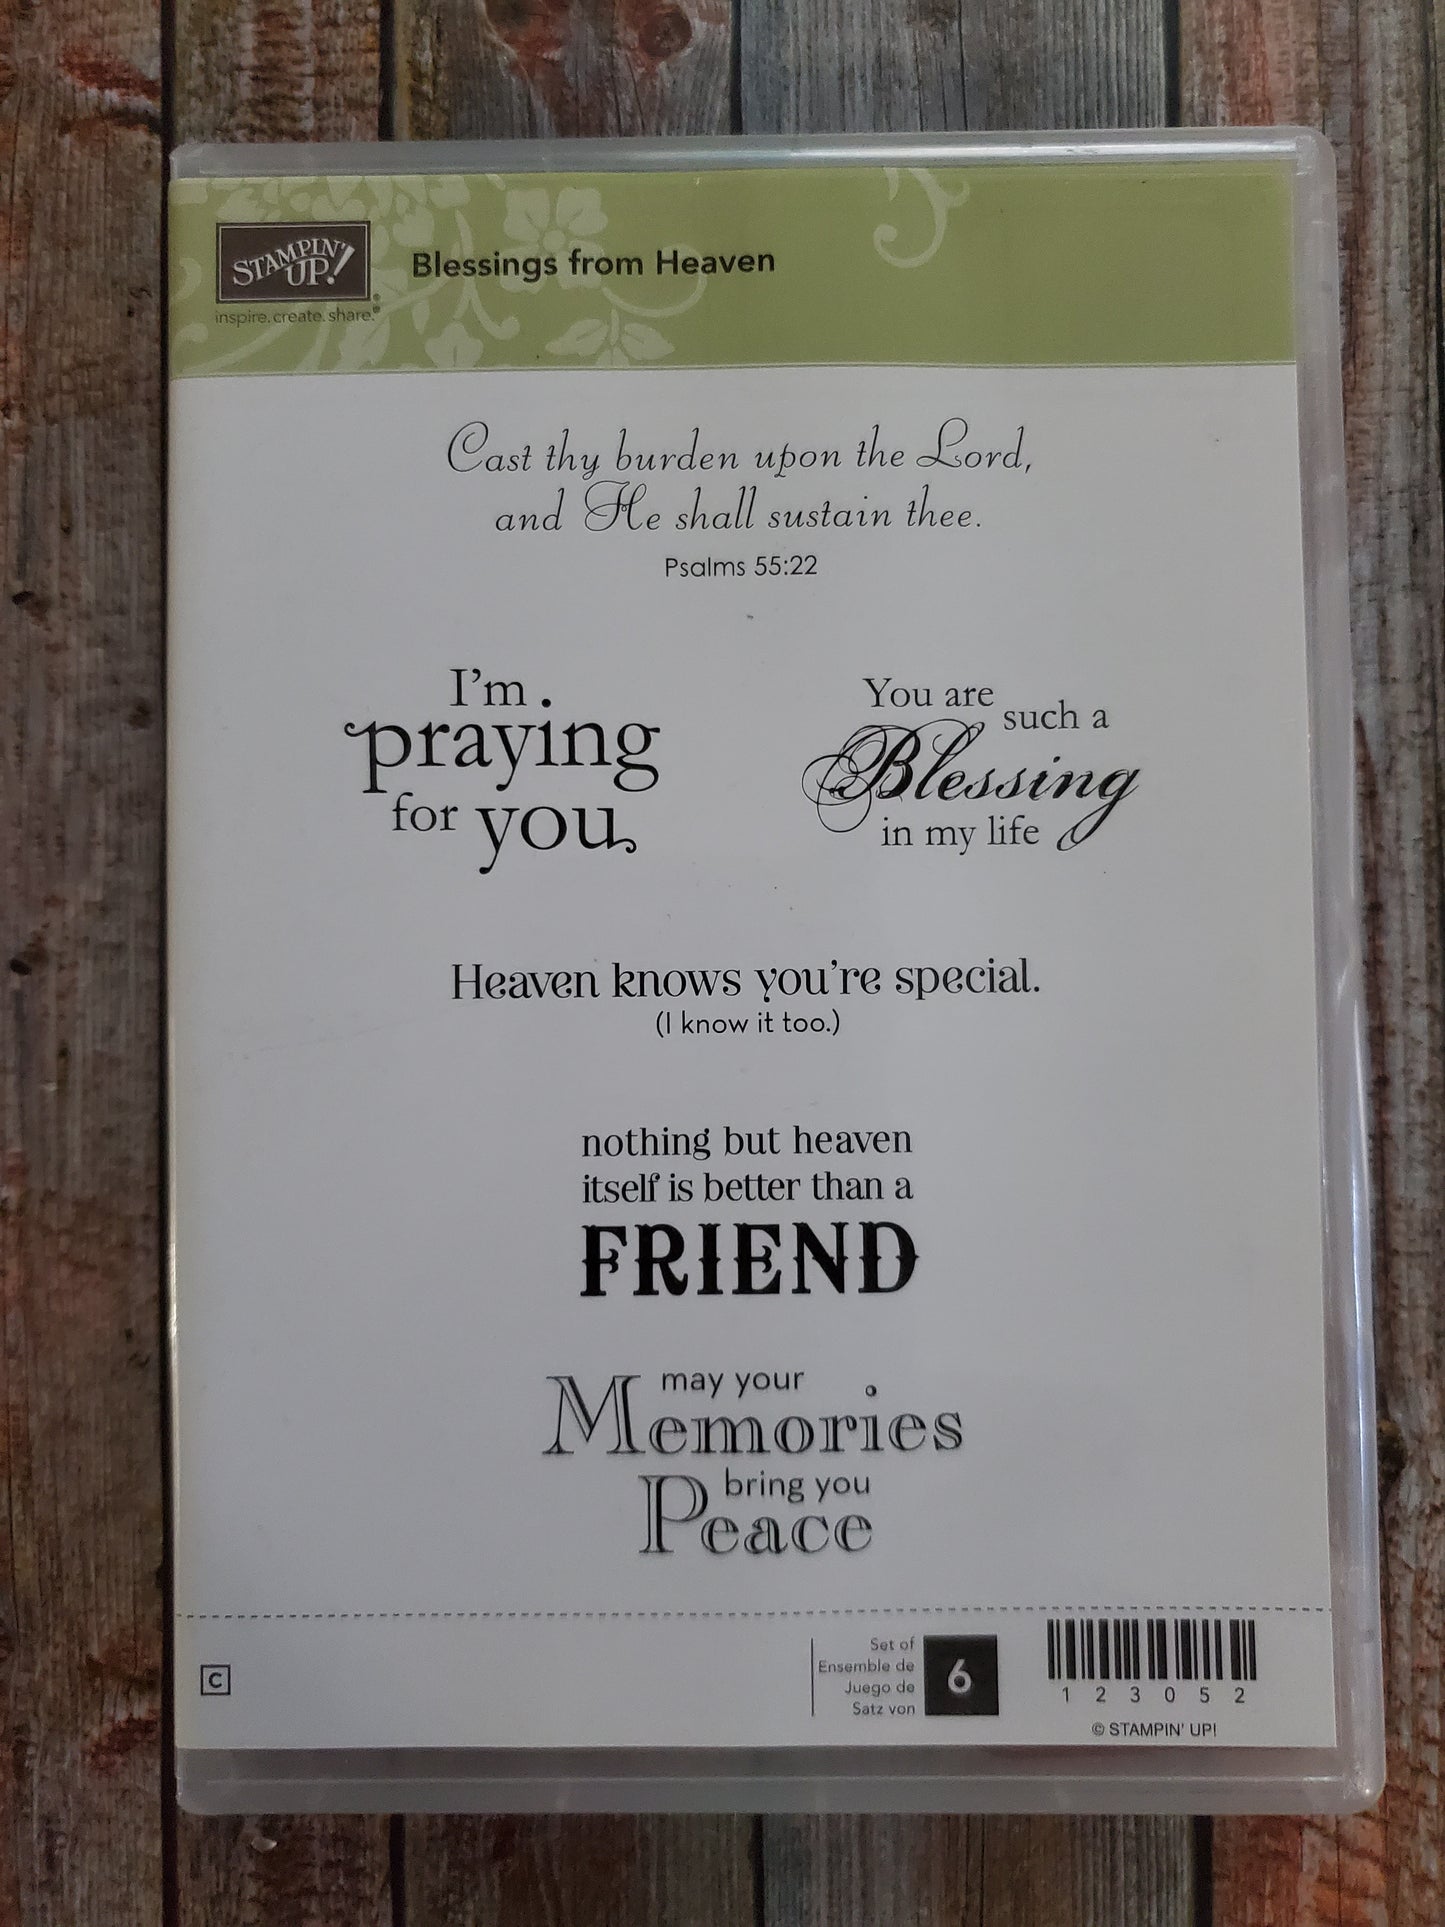 Stampin' UP! "Blessings from Heaven" Stamp Set